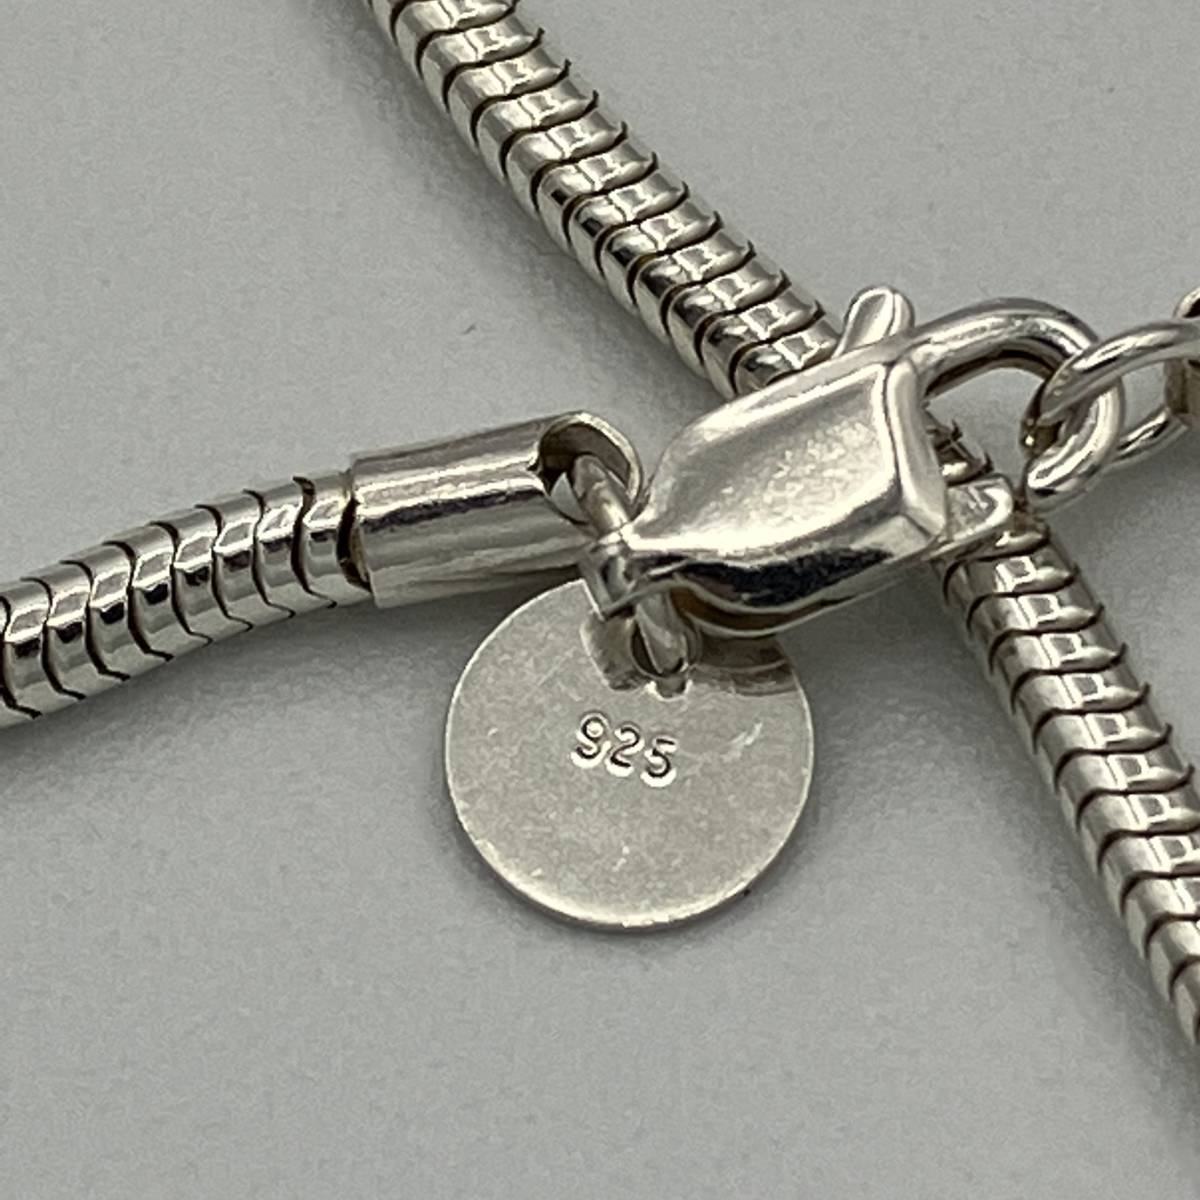  rare goods Tiffany round Rocket Vintage long necklace pendant silver 925 Necklace GERMANY Sune -k chain 